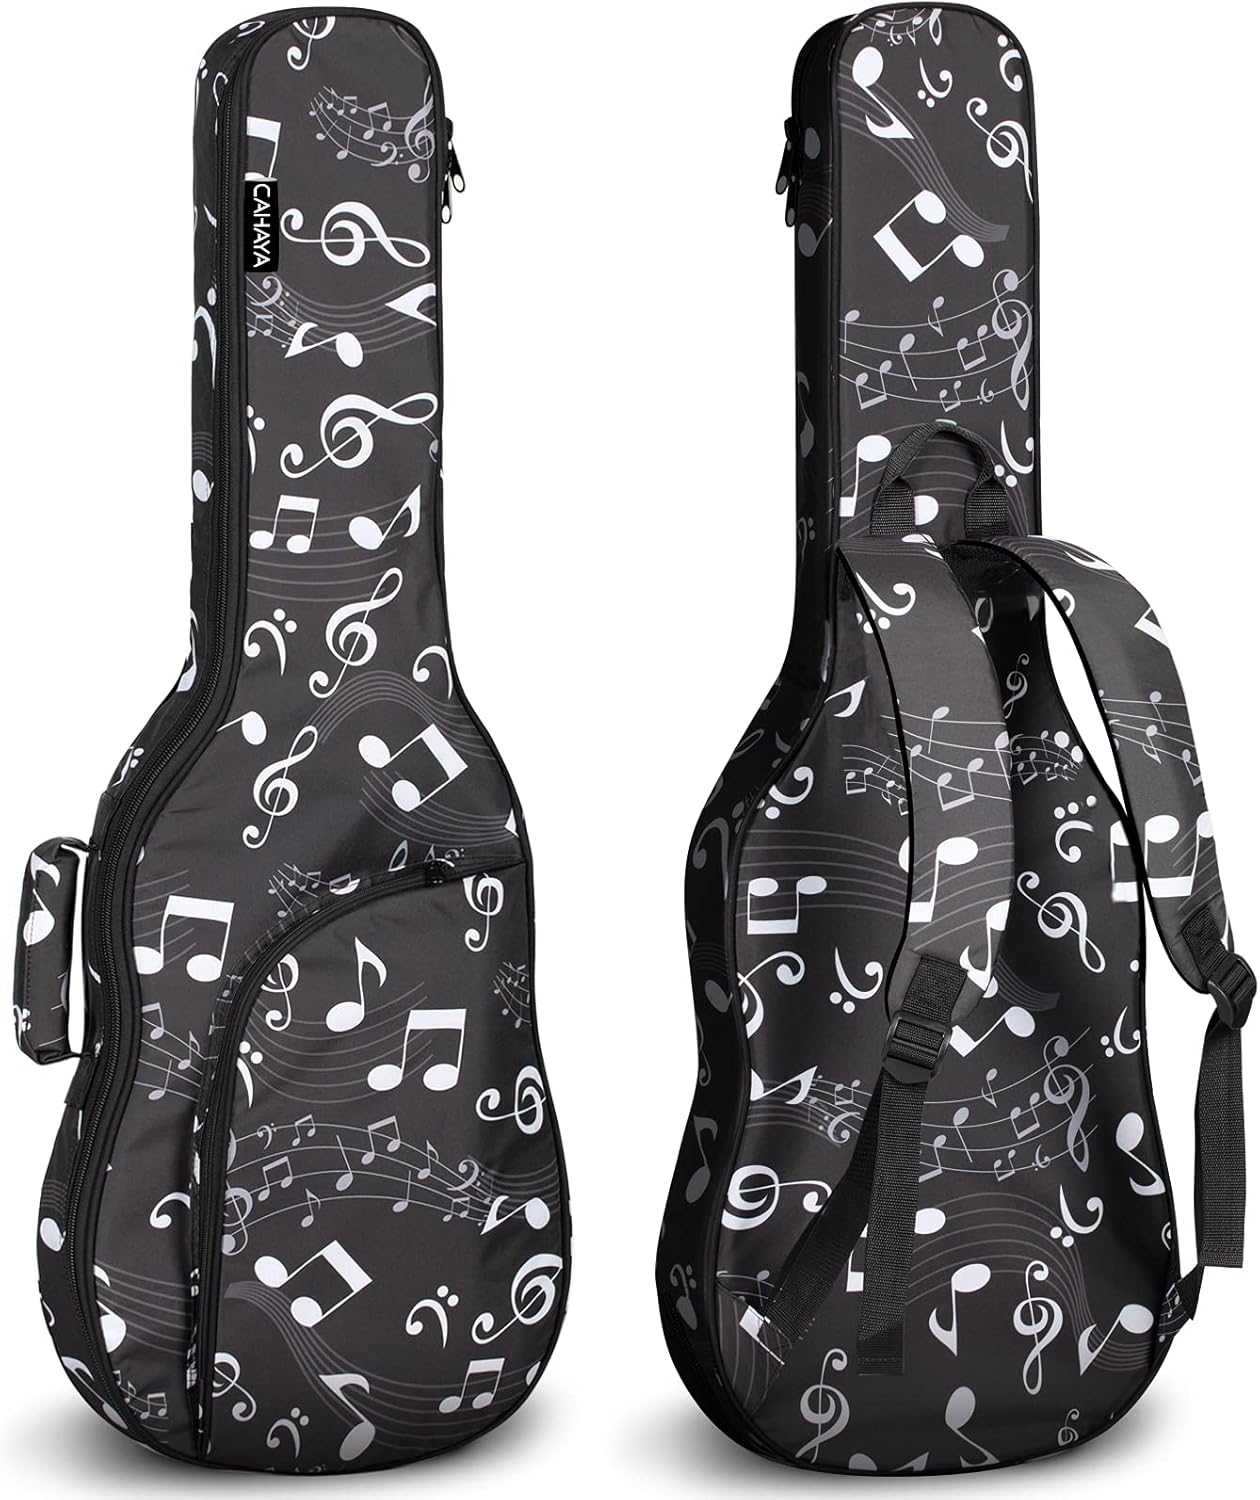 The Electric Guitar Case Note Printing Soft Gig Bag 8mm Padding Guitar Bag Backpack with Handle Loop CY0267